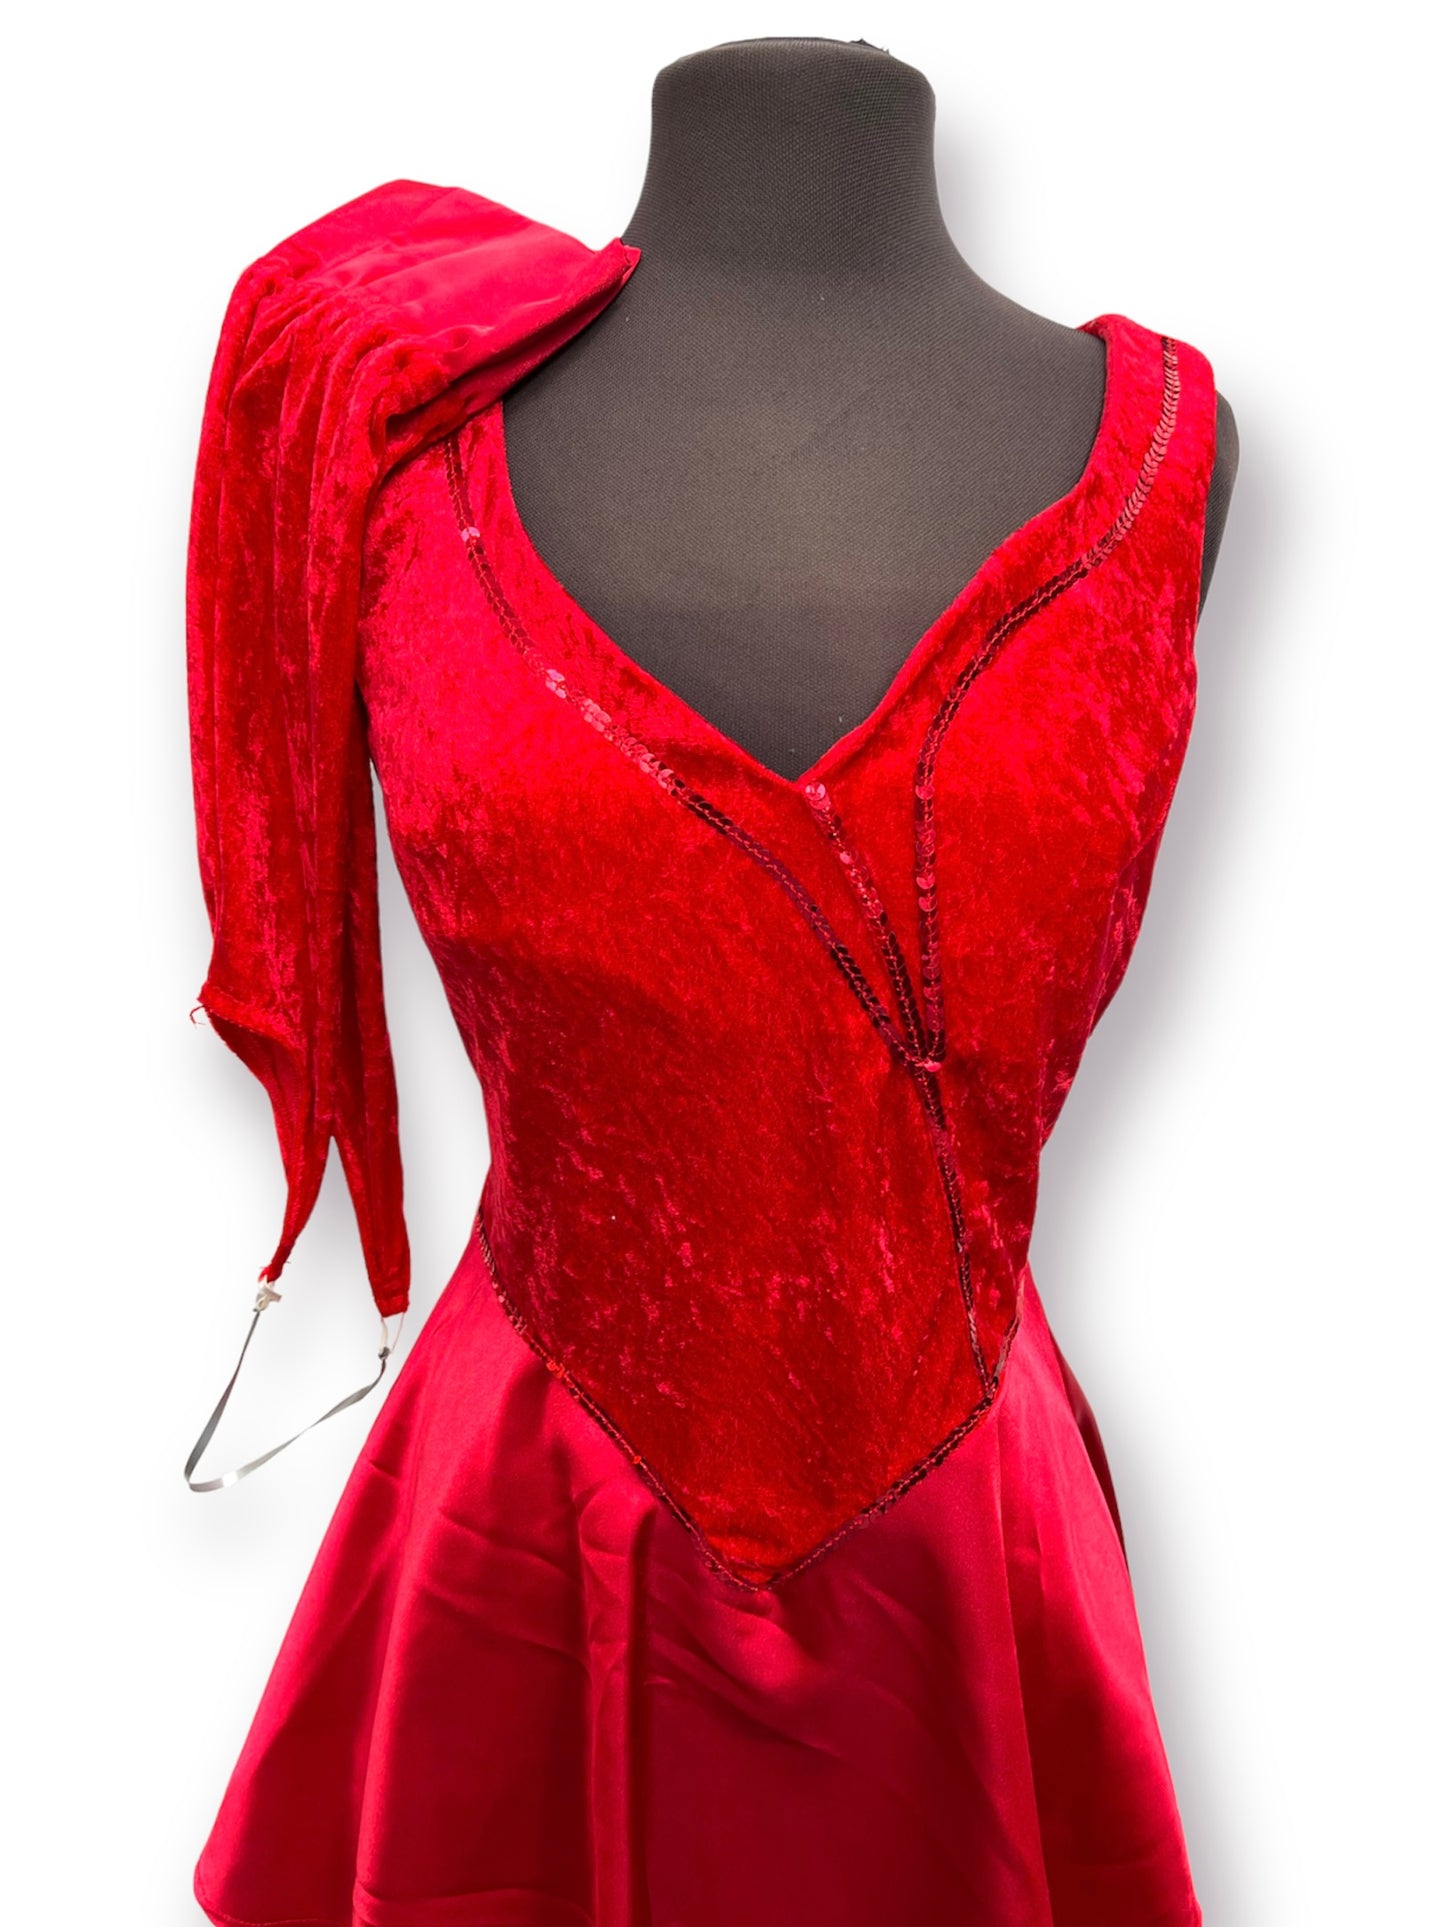 Sexy Short Halloween Red Devil Dress with Cuffs Size Small - Ex Hire Fancy Dress Costume